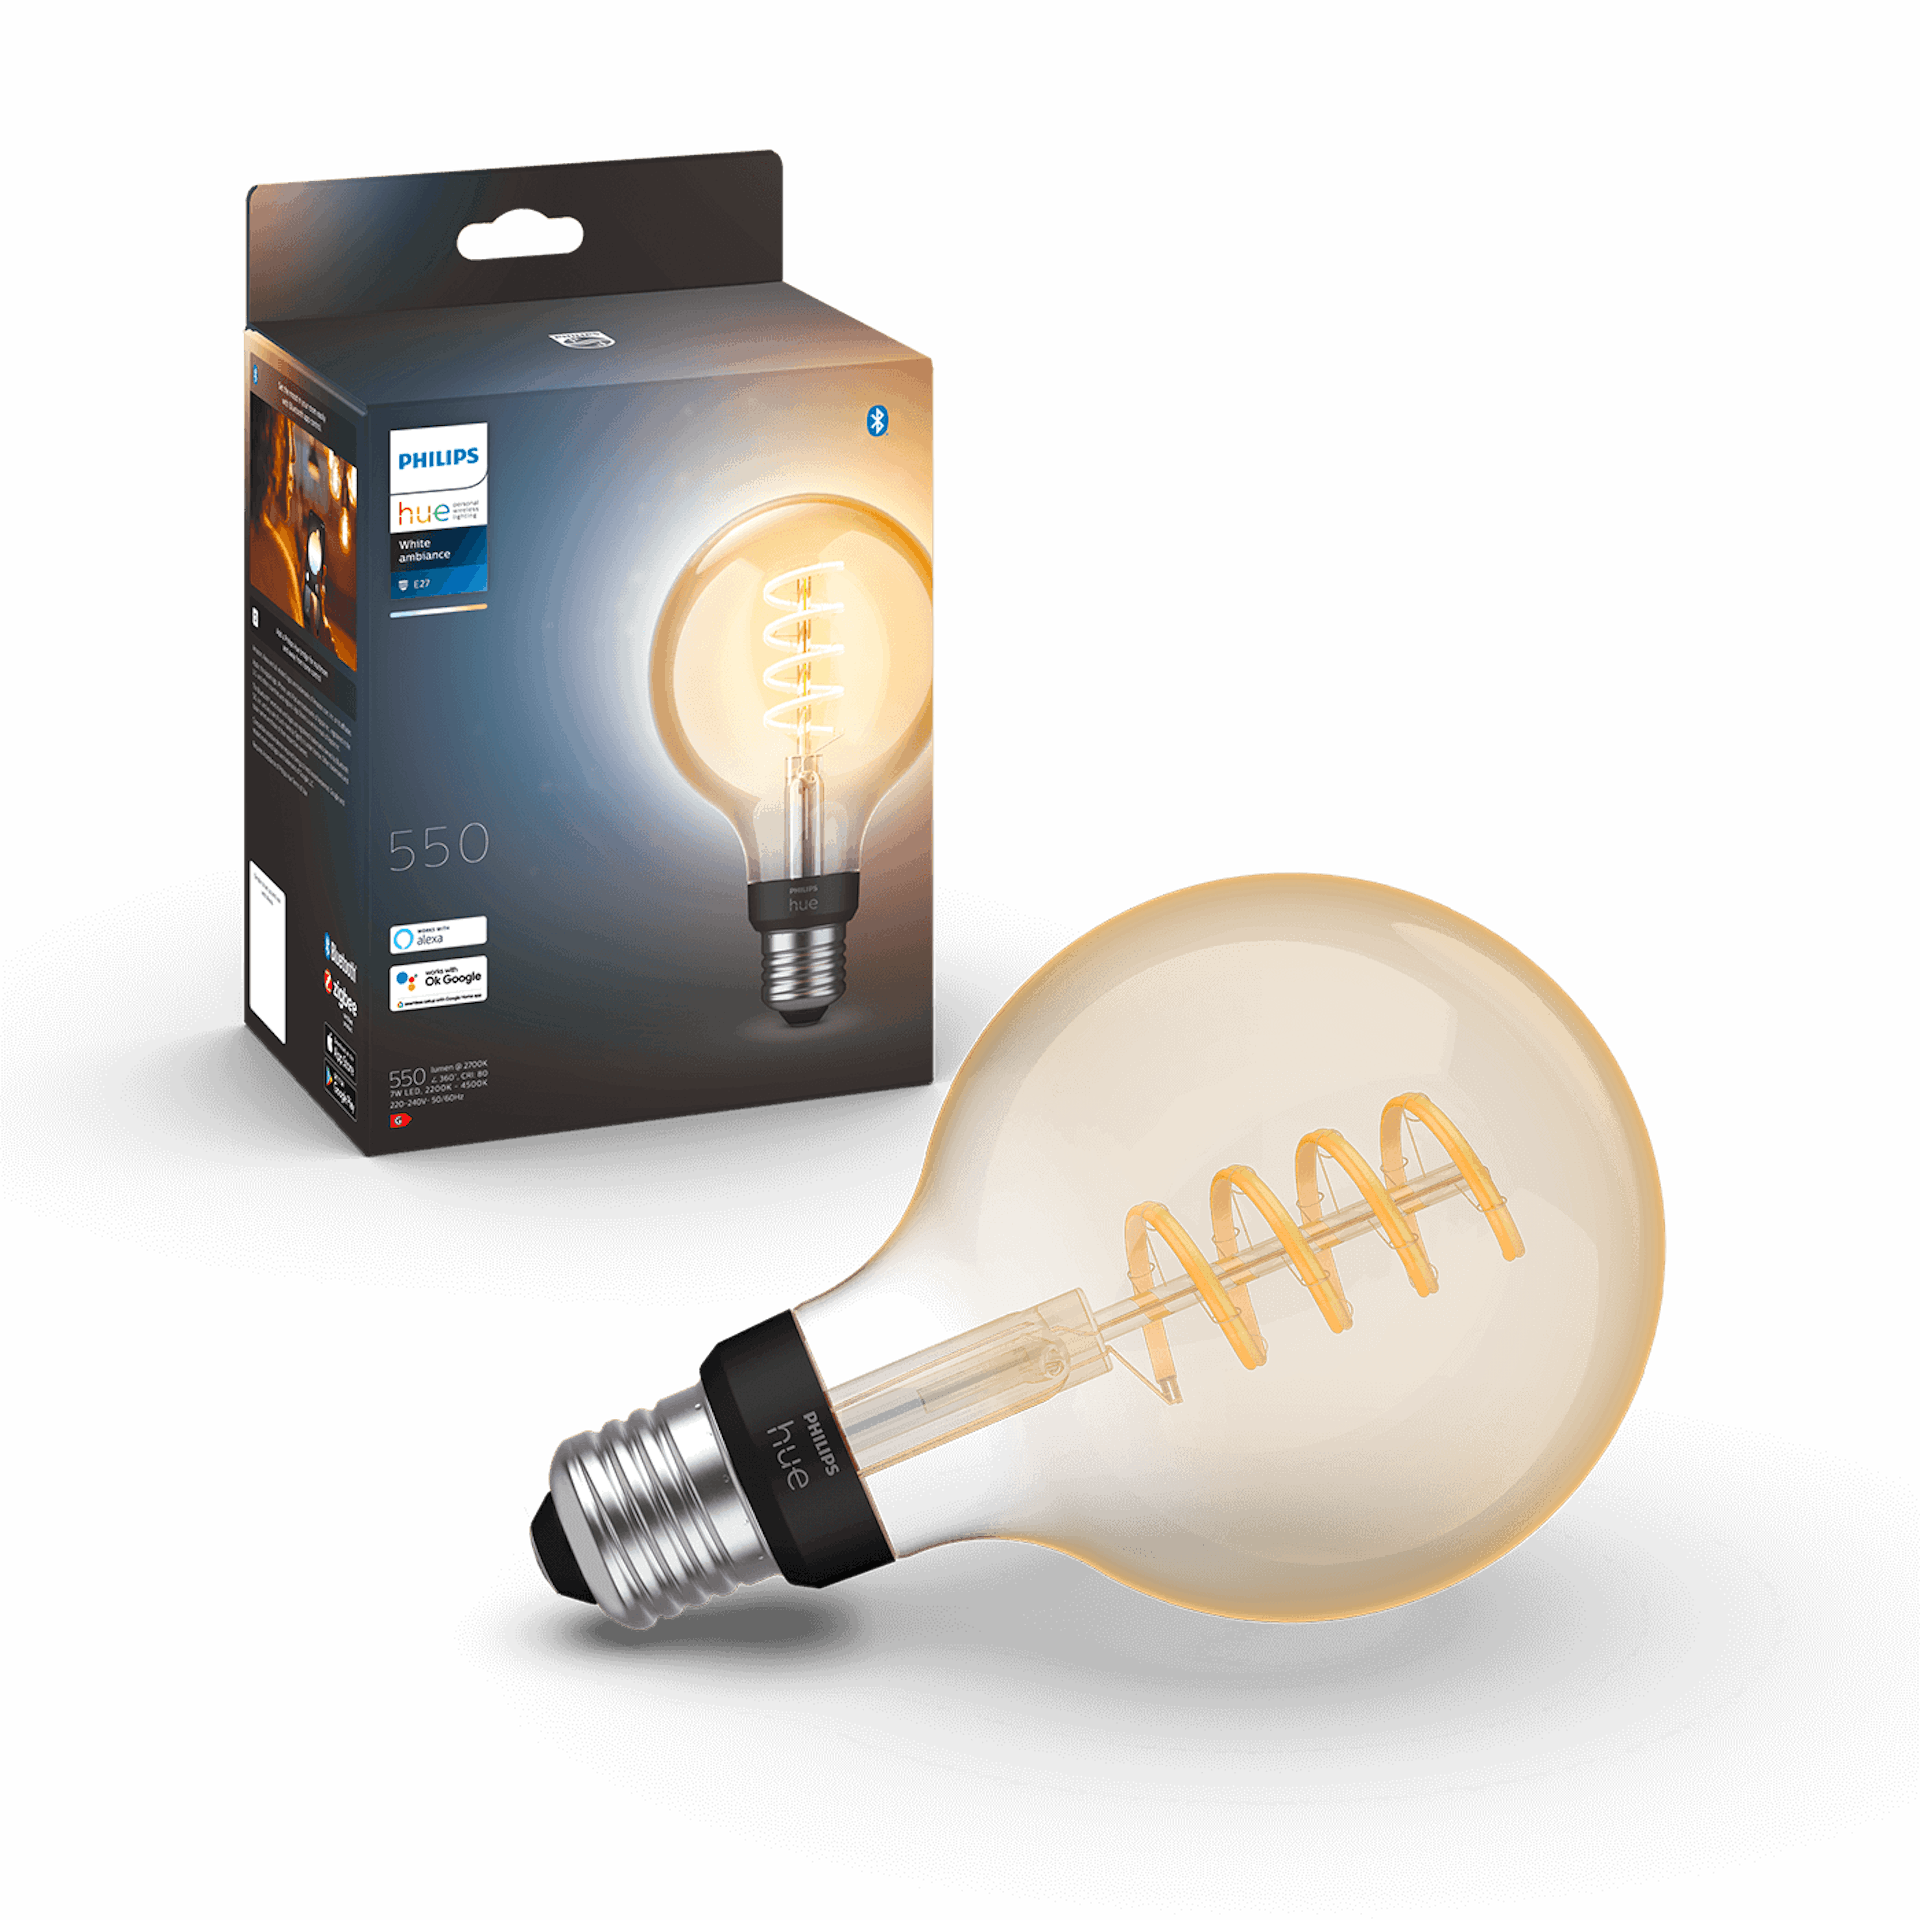 Philips Hue White Ambiance Filament E27 G93 - Details - Packaging image